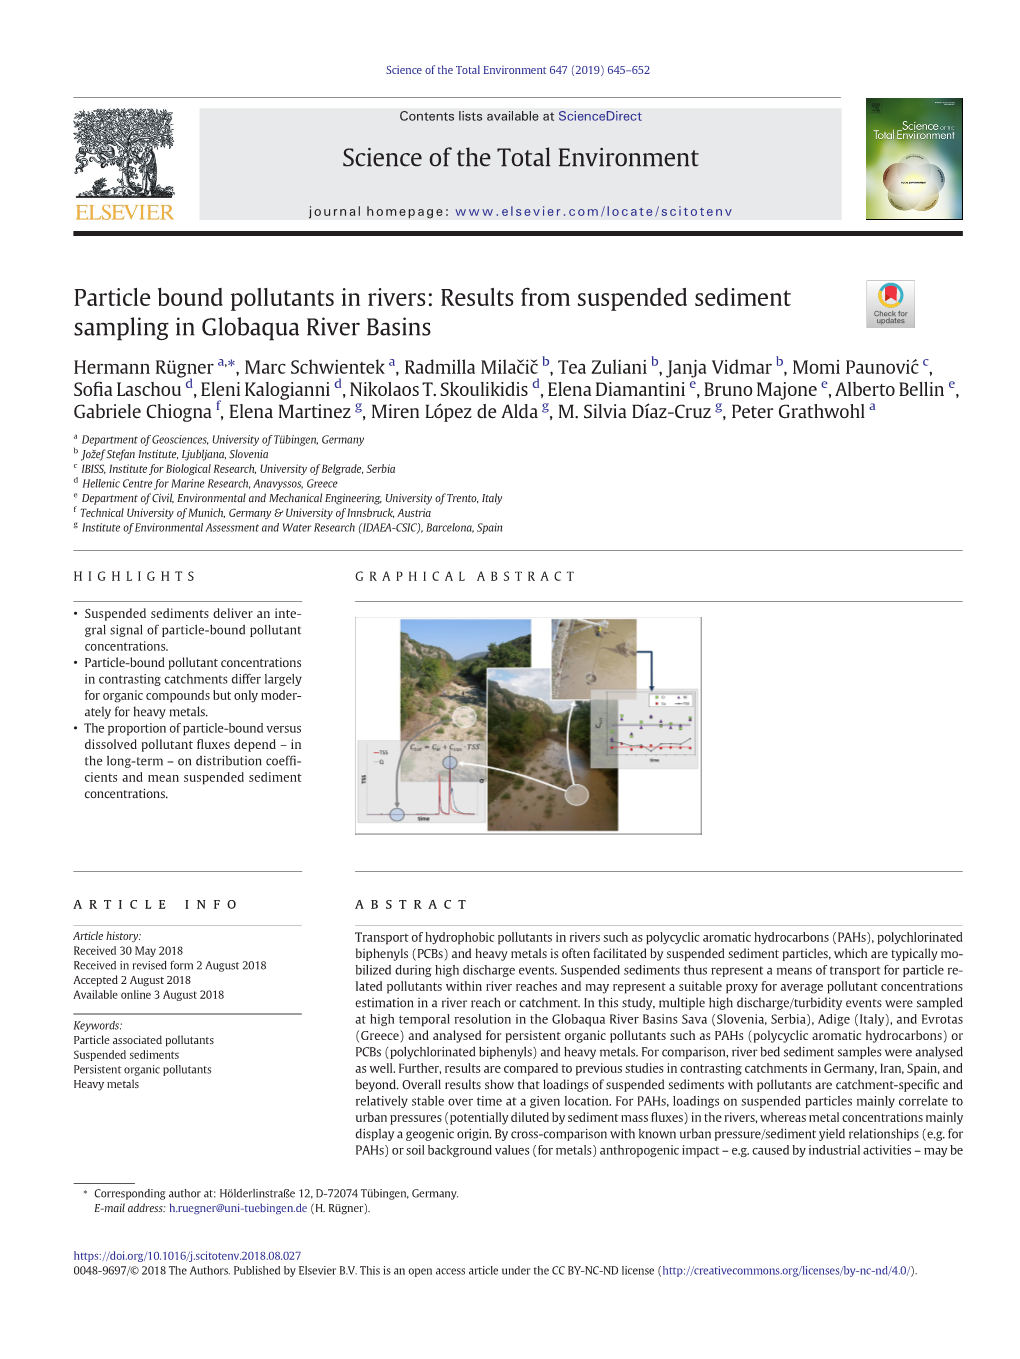 Results from Suspended Sediment Sampling in Globaqua River Basins